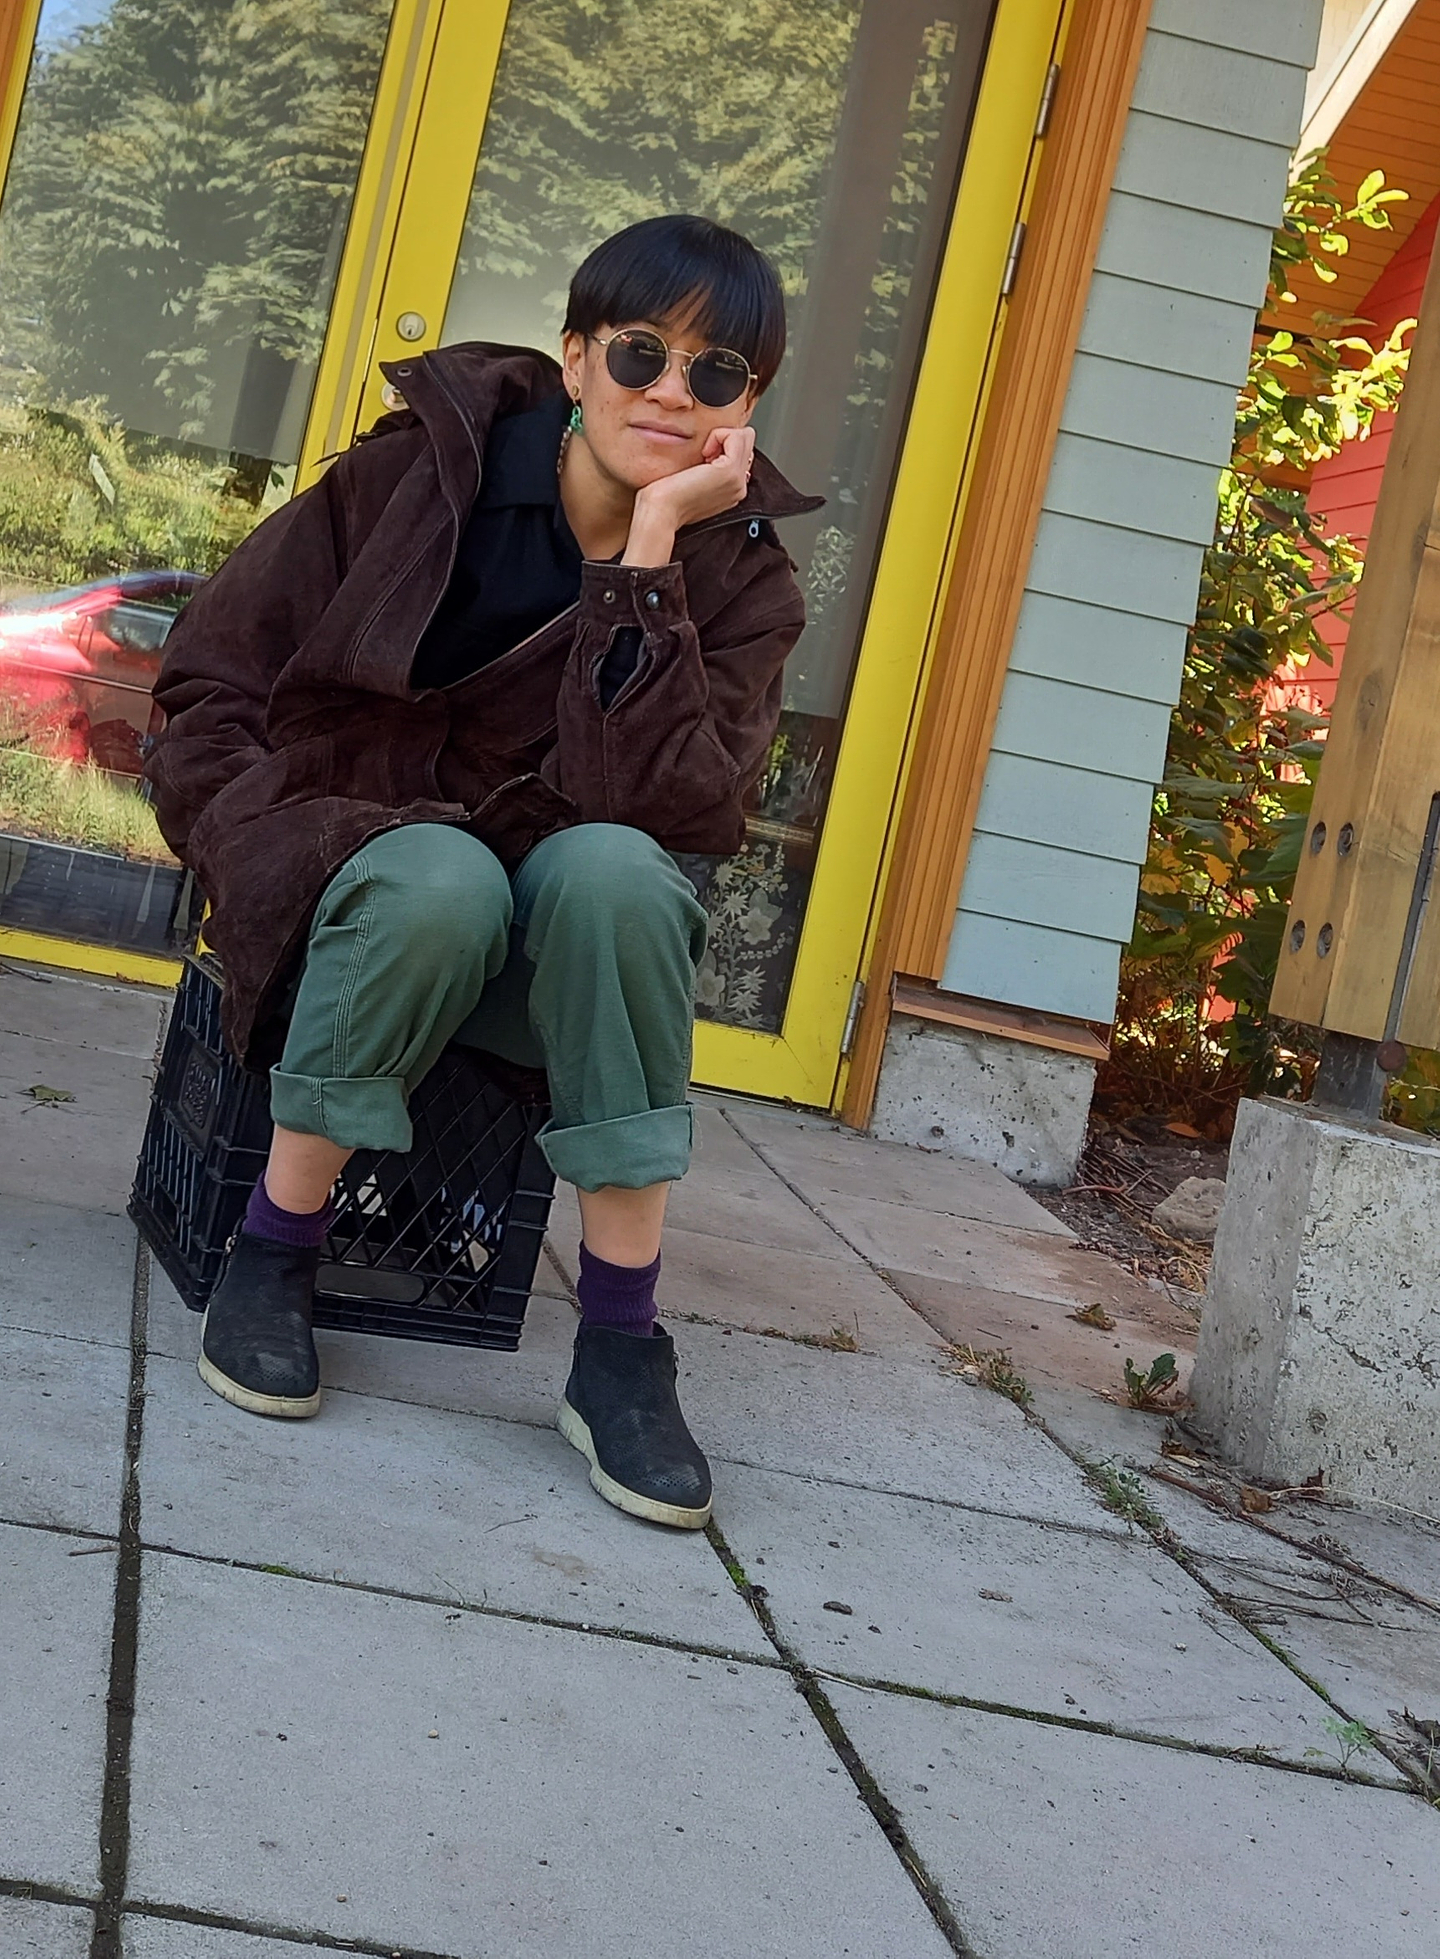 S F Ho sits on a black milk crate outside of a building with a glass door and yellow trim. They cradle their chin in their palm, and wear round sunglasses, a brown jacket, green cuffed pants, purple socks, and ankle boots.